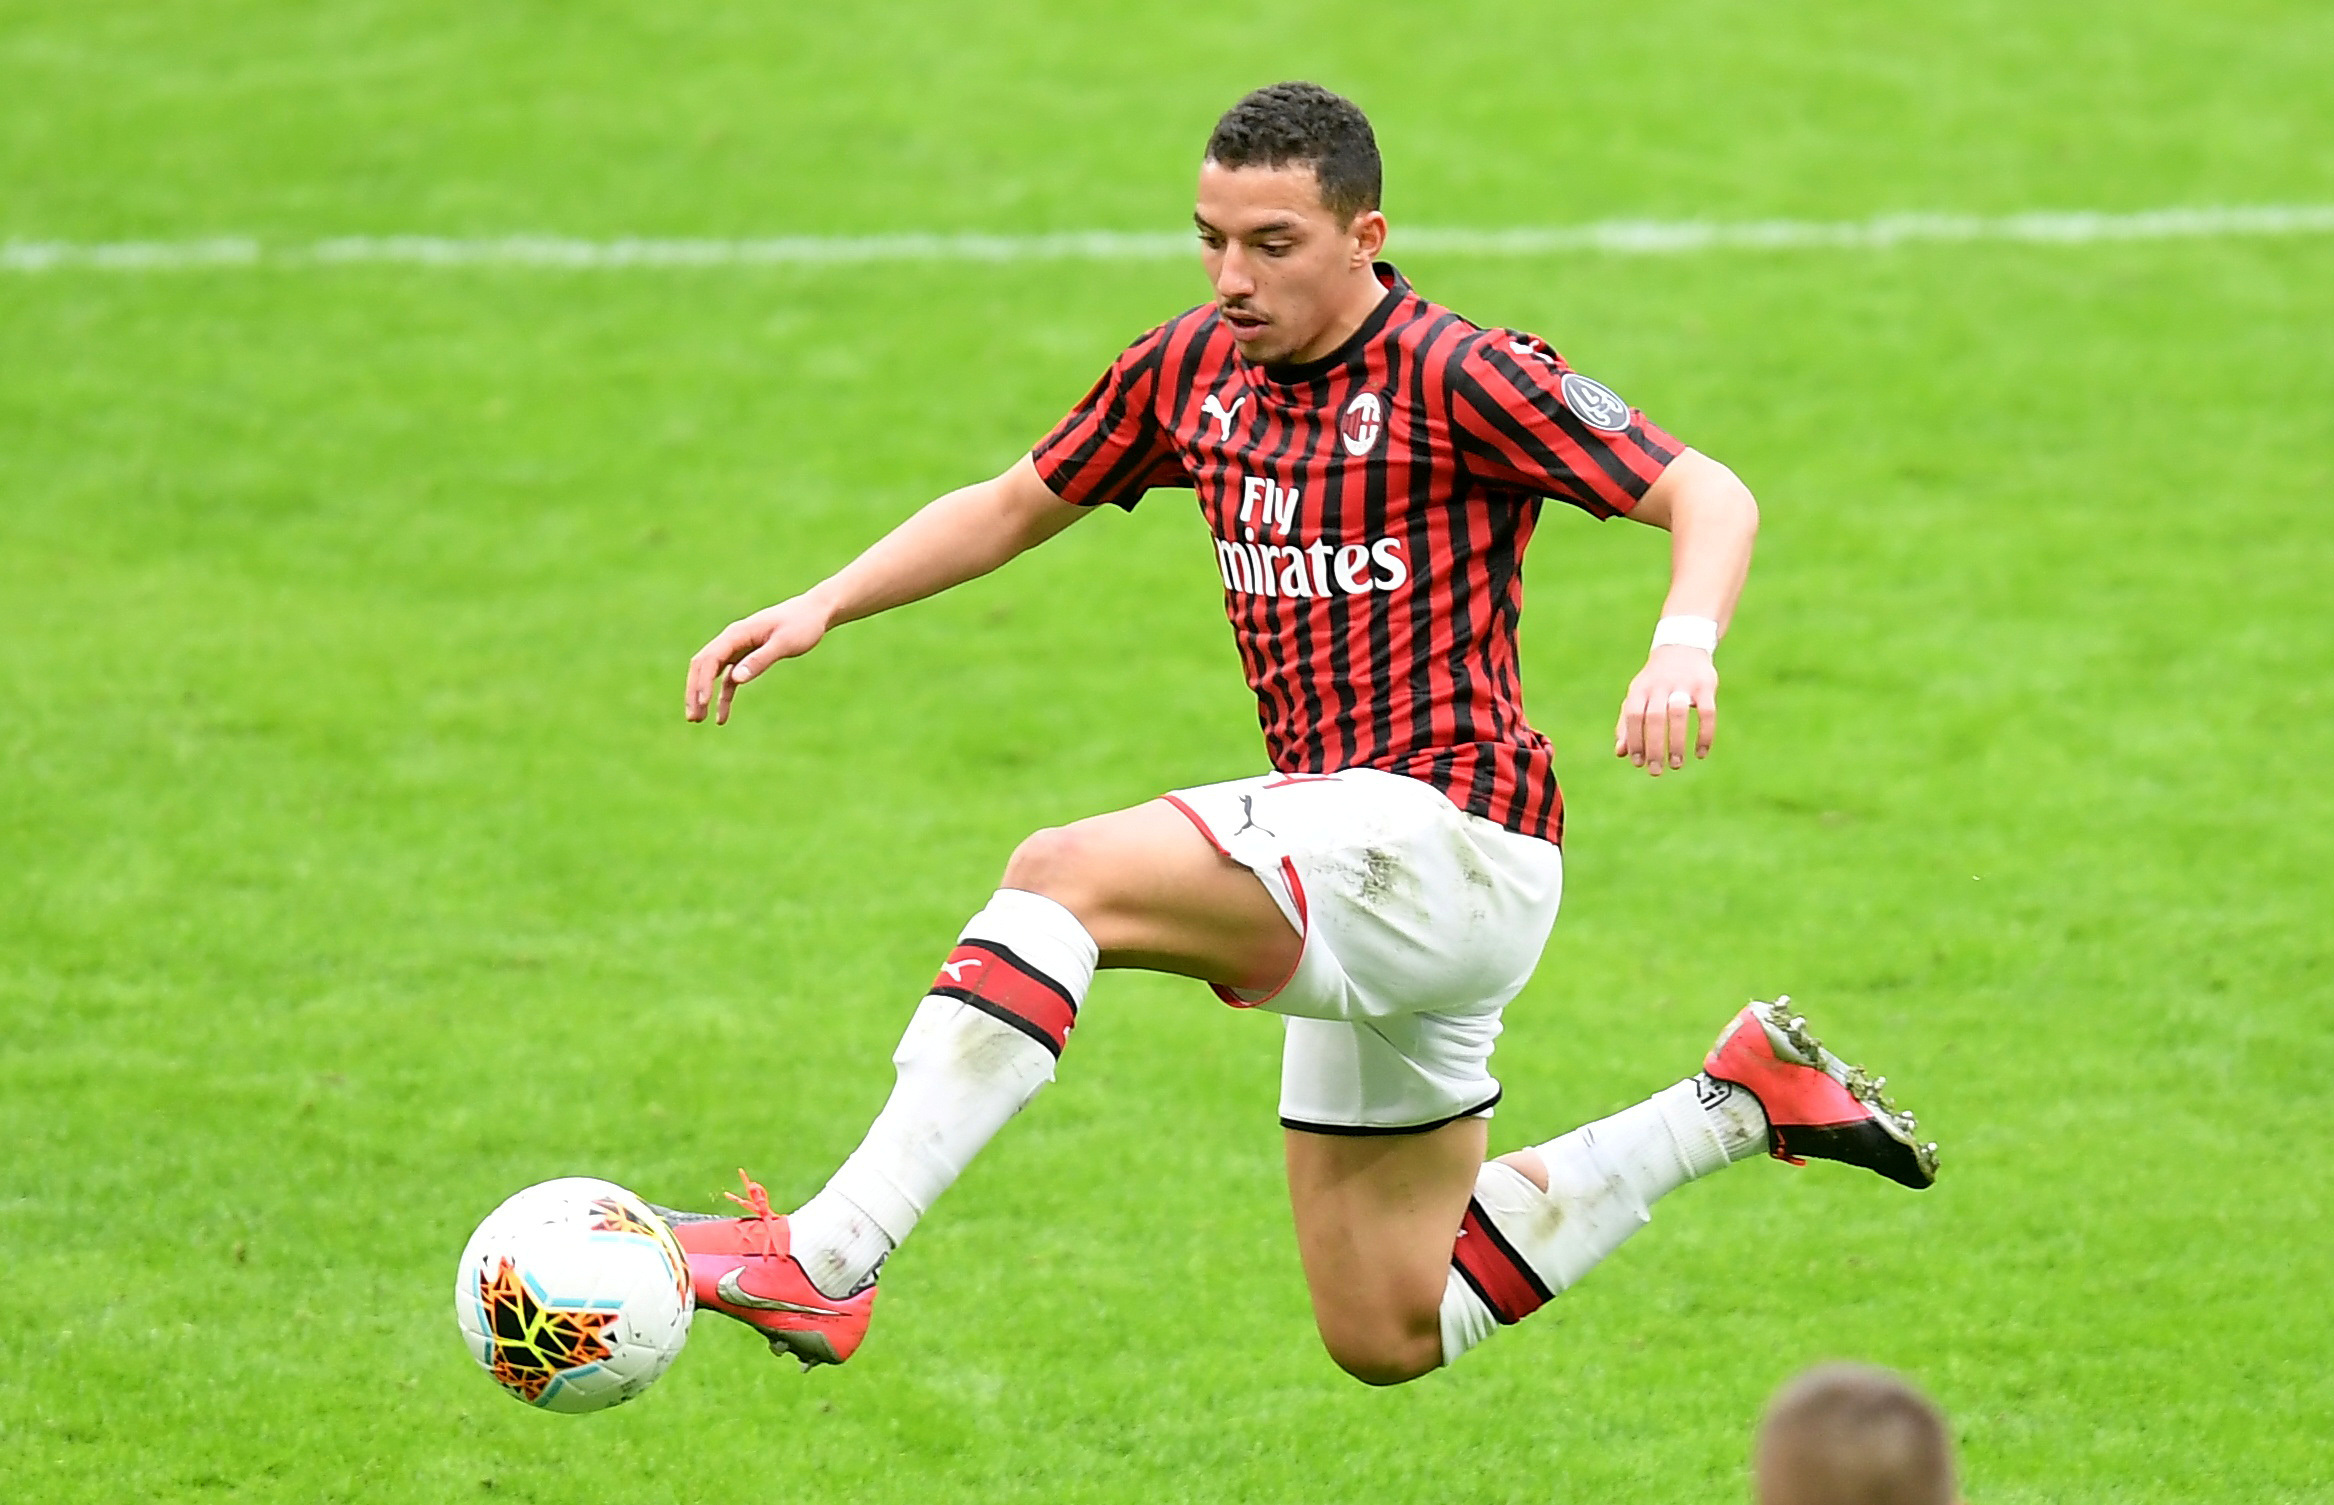 Bennacer's Release Clause Unveiled as Milan Considers Accepting Lower Offers